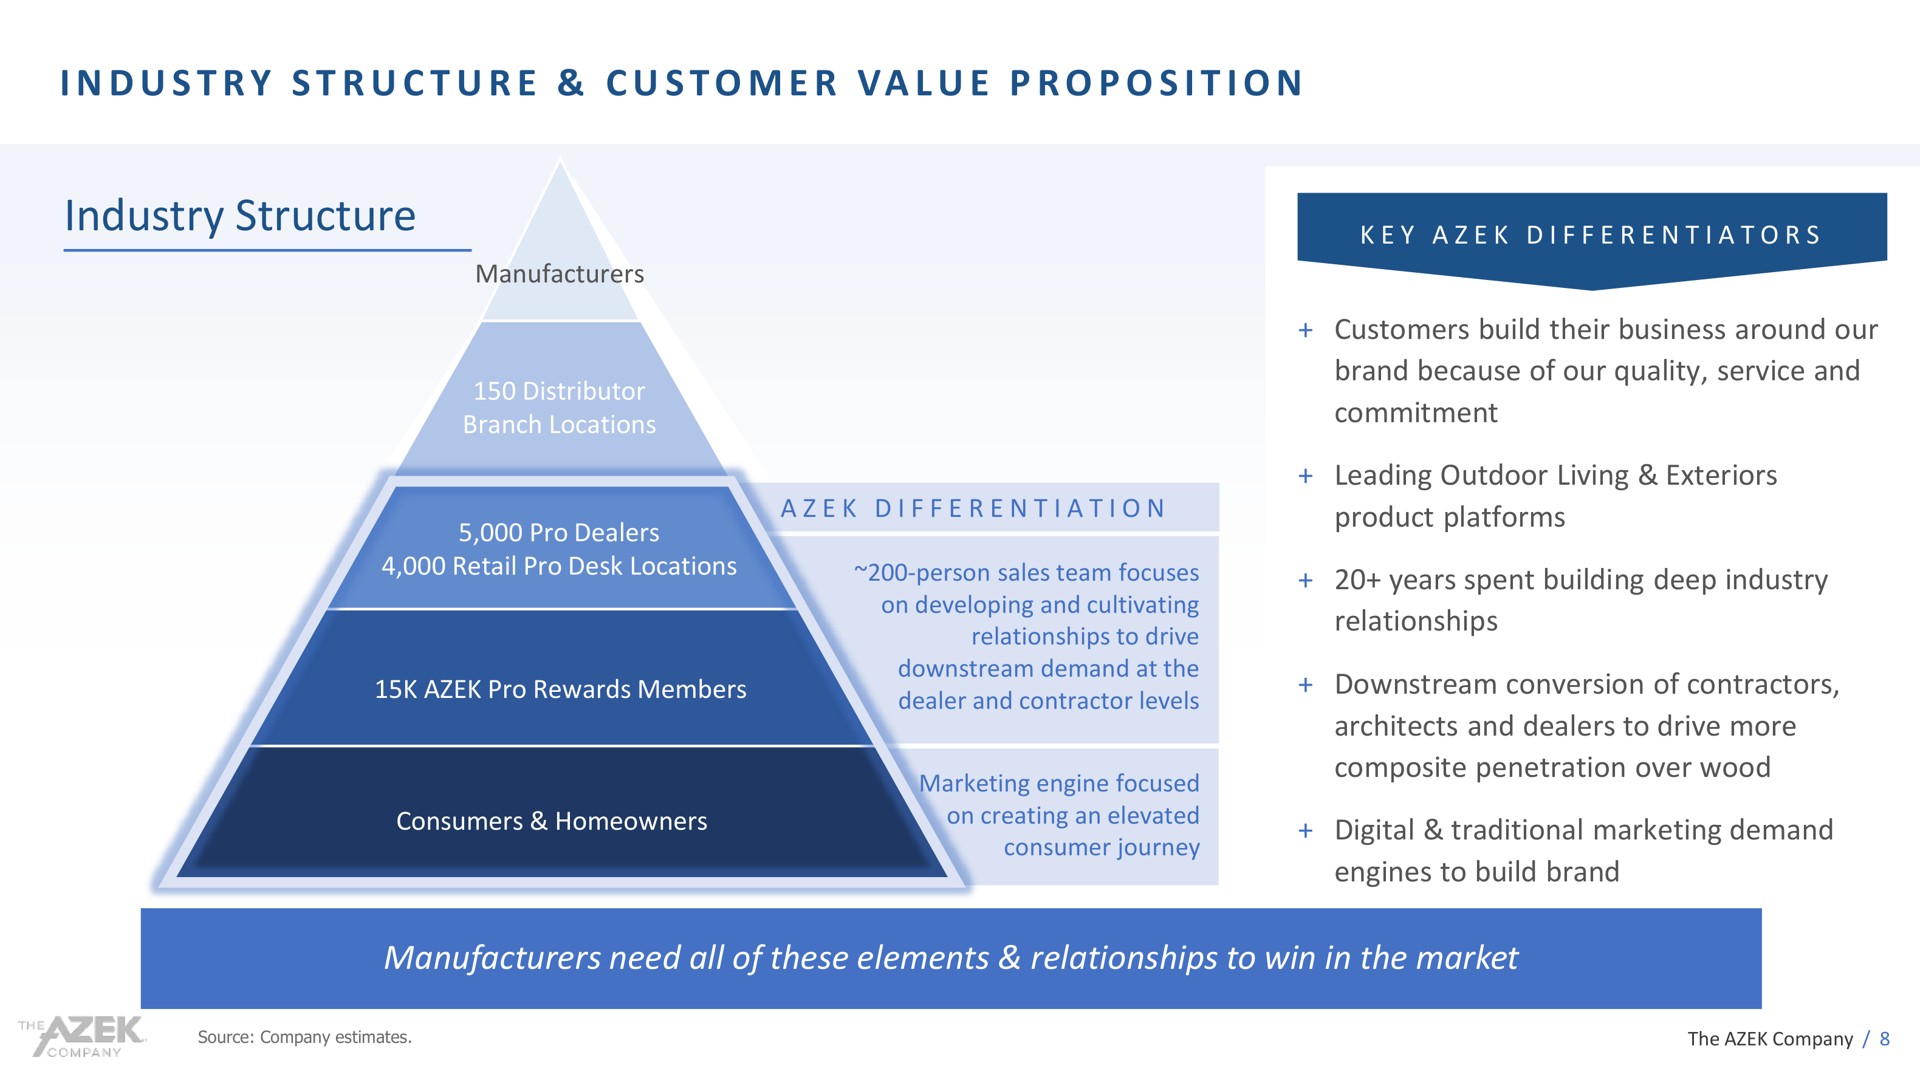 i i i industry structure manufacturers need all of these elements relationships to win in the market customer value proposition | Azek